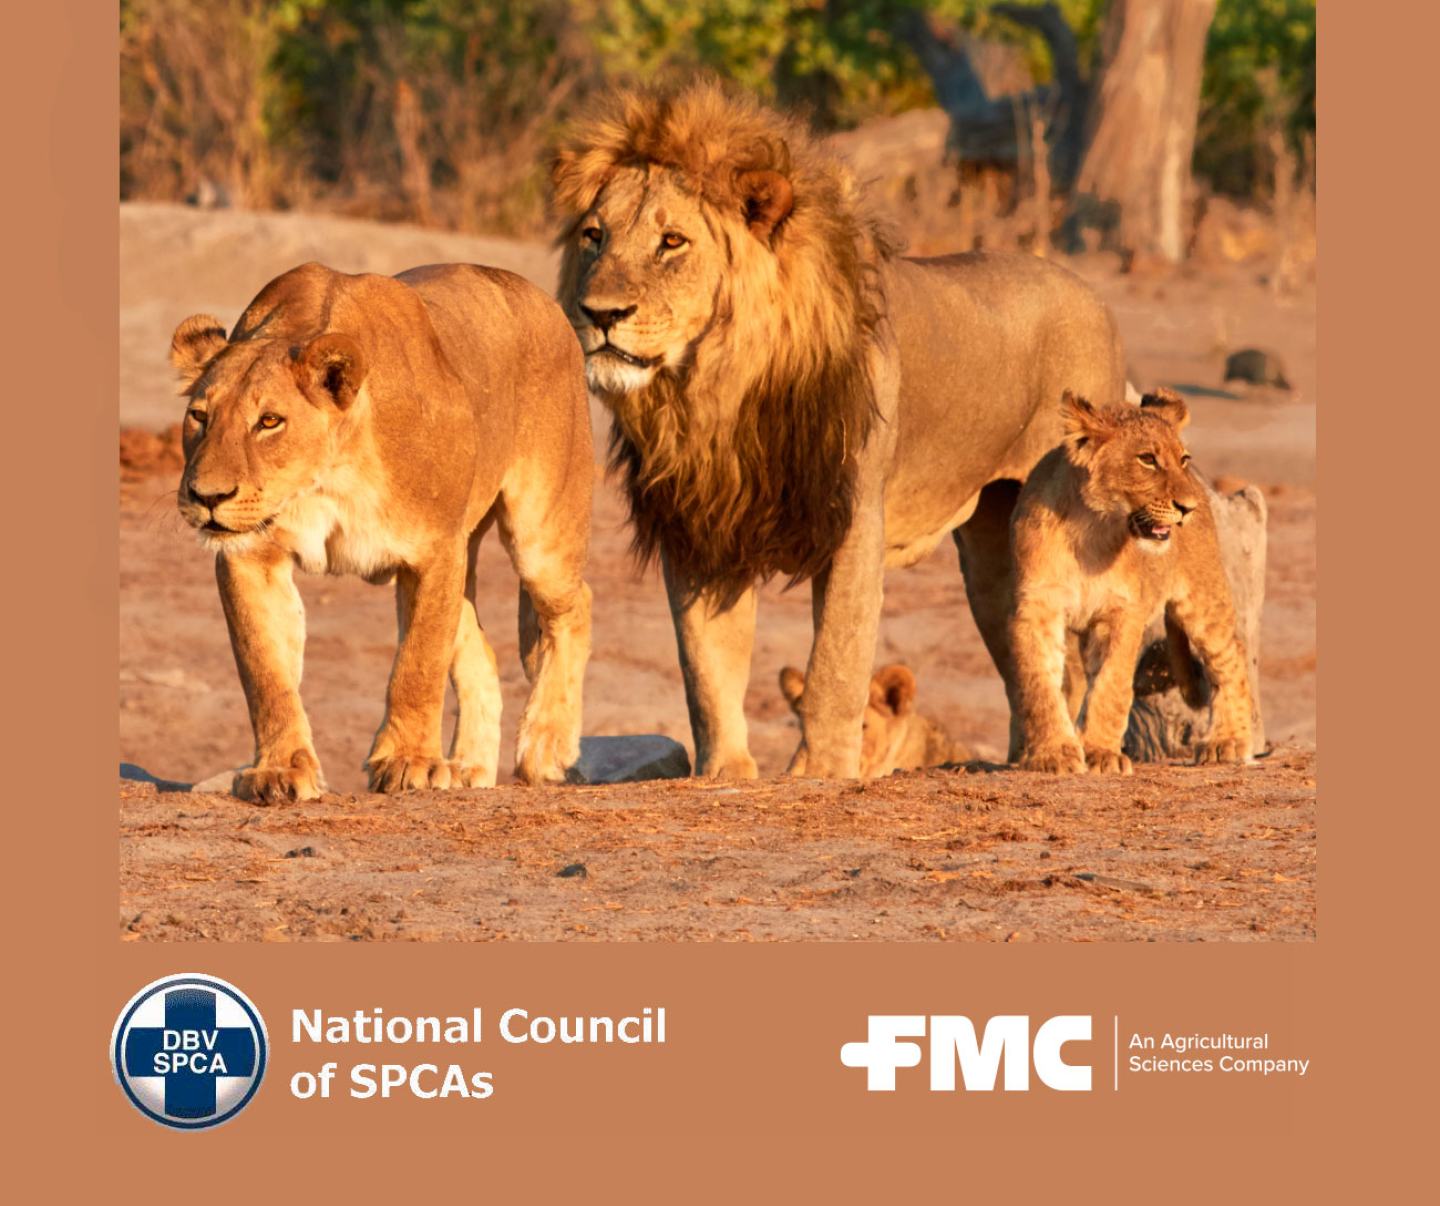 FMC supports the NSPCA of South Africa